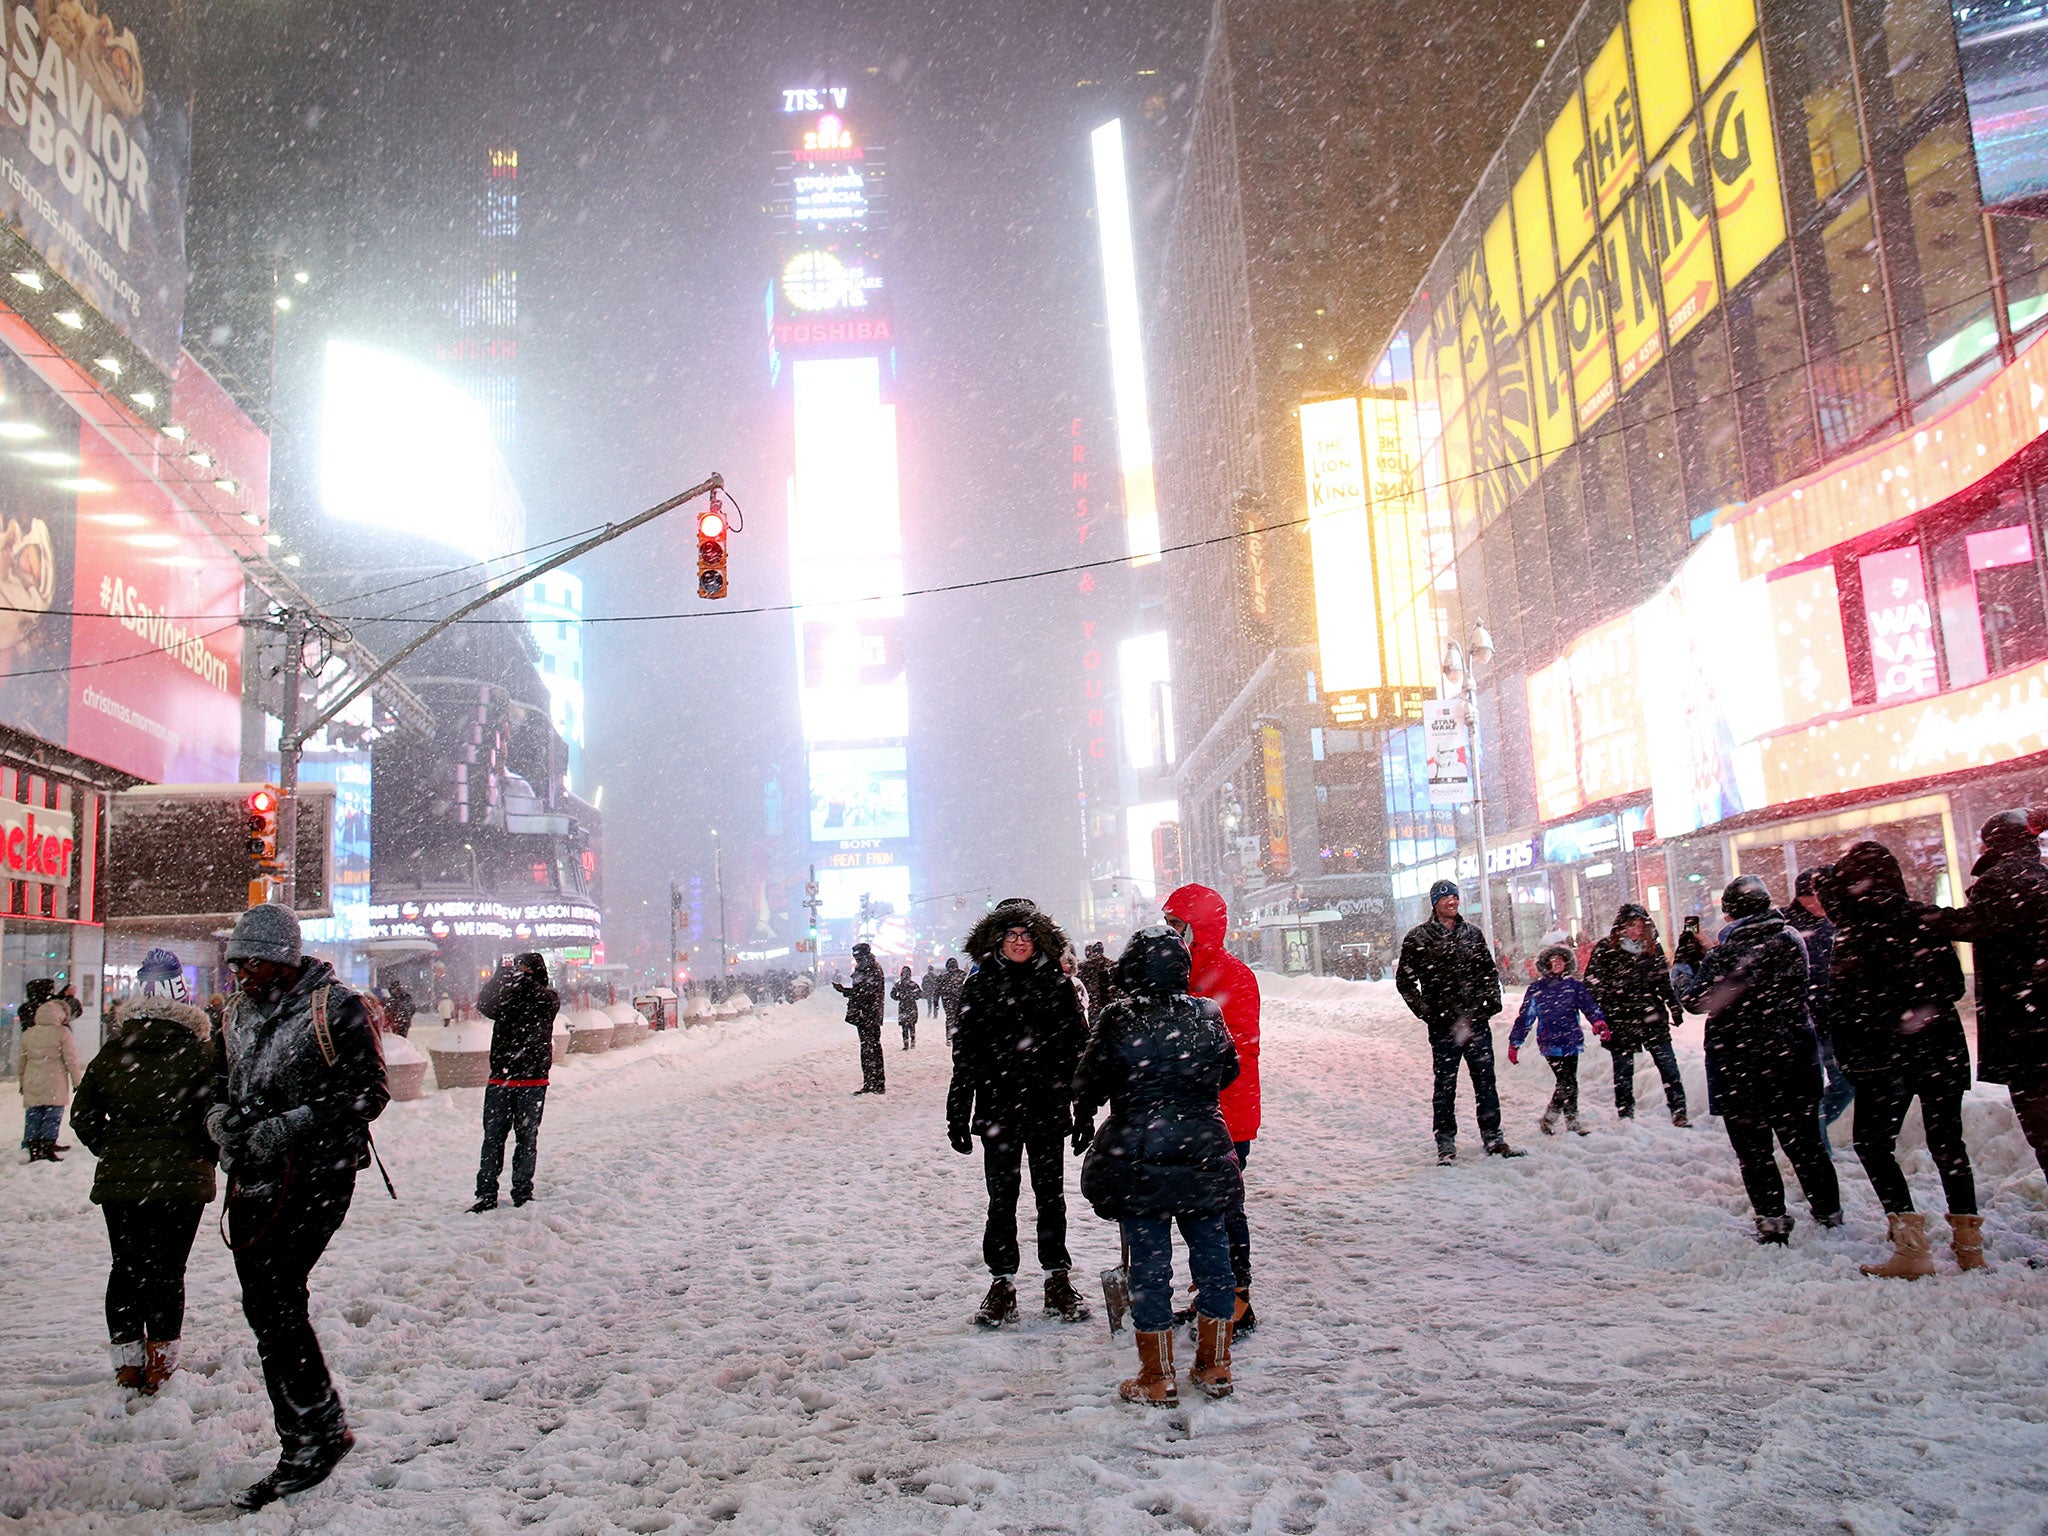 Pedestrians walk through the snowy streets near Times Square as all cars but emergency vehicles are banned from driving on the road on 23 January, 2016 in New York City